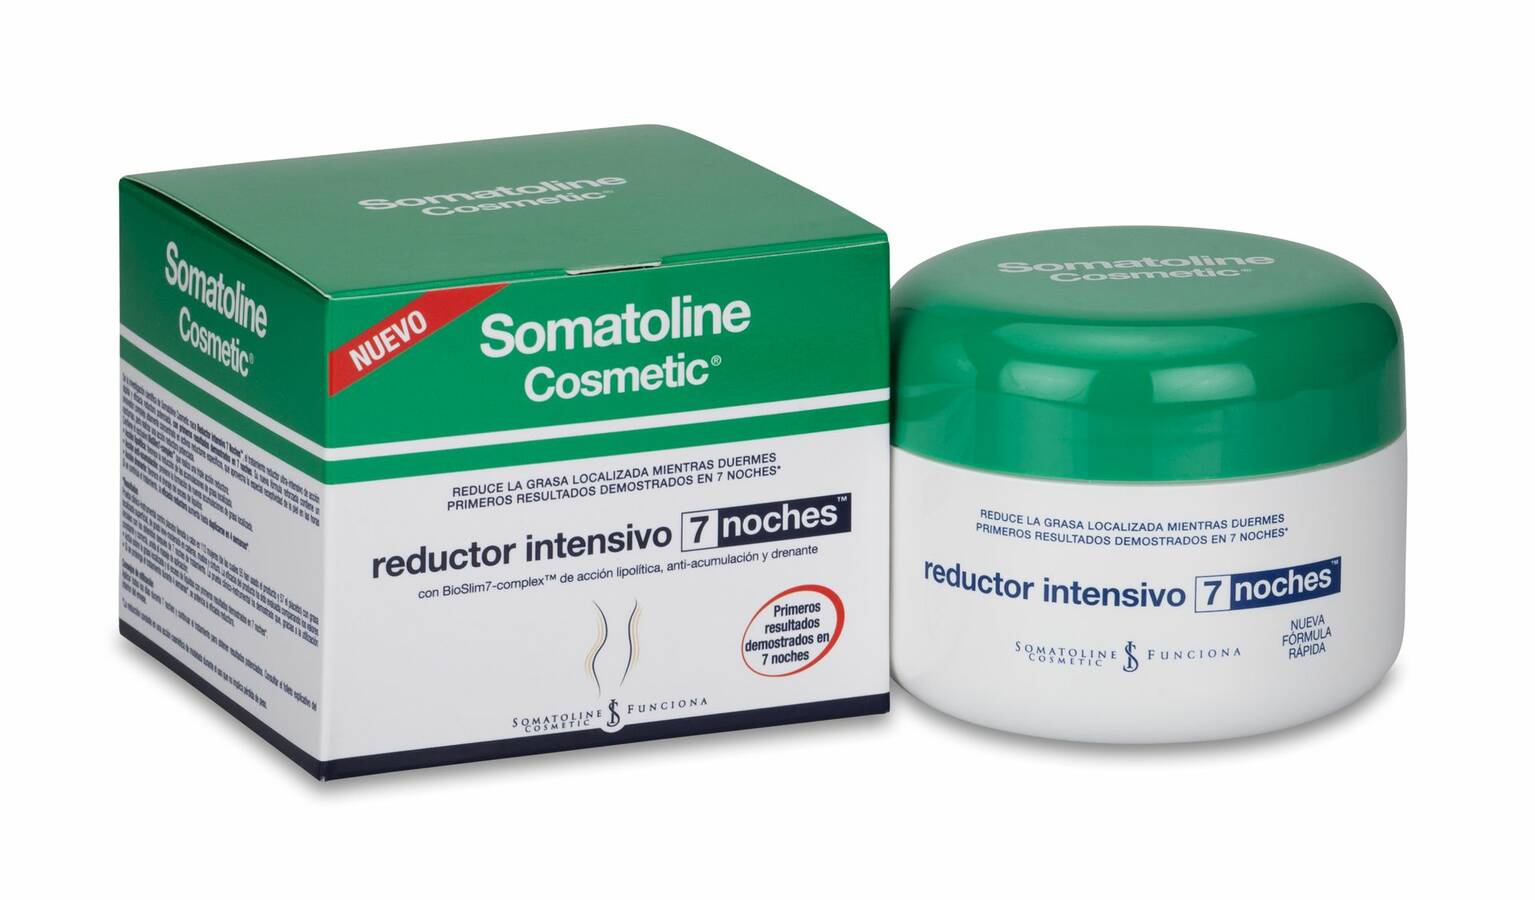 Somatoline Cosmetic Tratamiento Reductor Intensivo Noche, 250 ml image number null